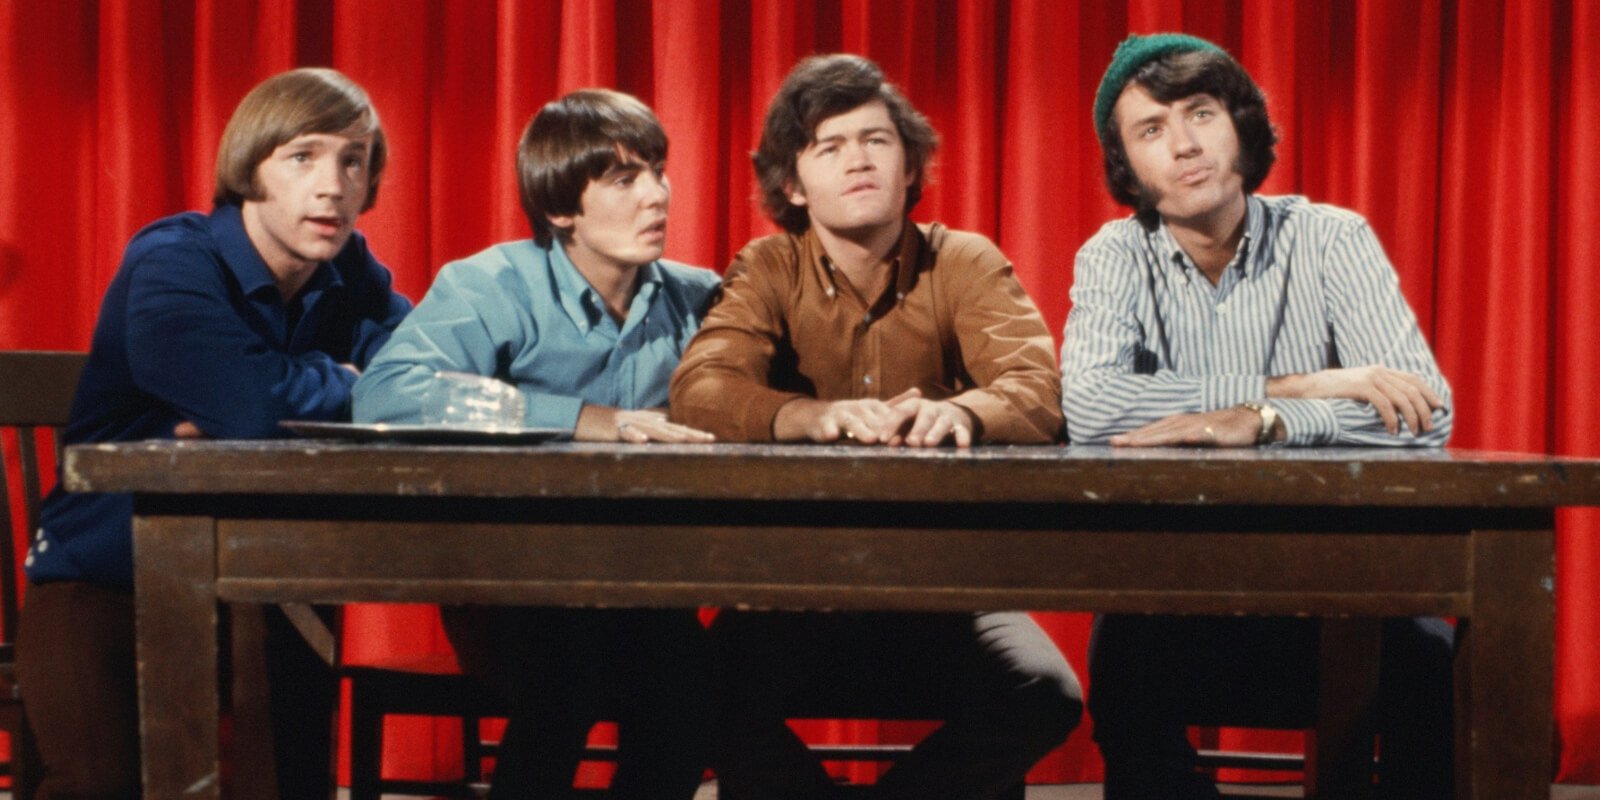 The Monkees on the set of the set of an episode of the television series title 'The Devil and Peter Tork.'